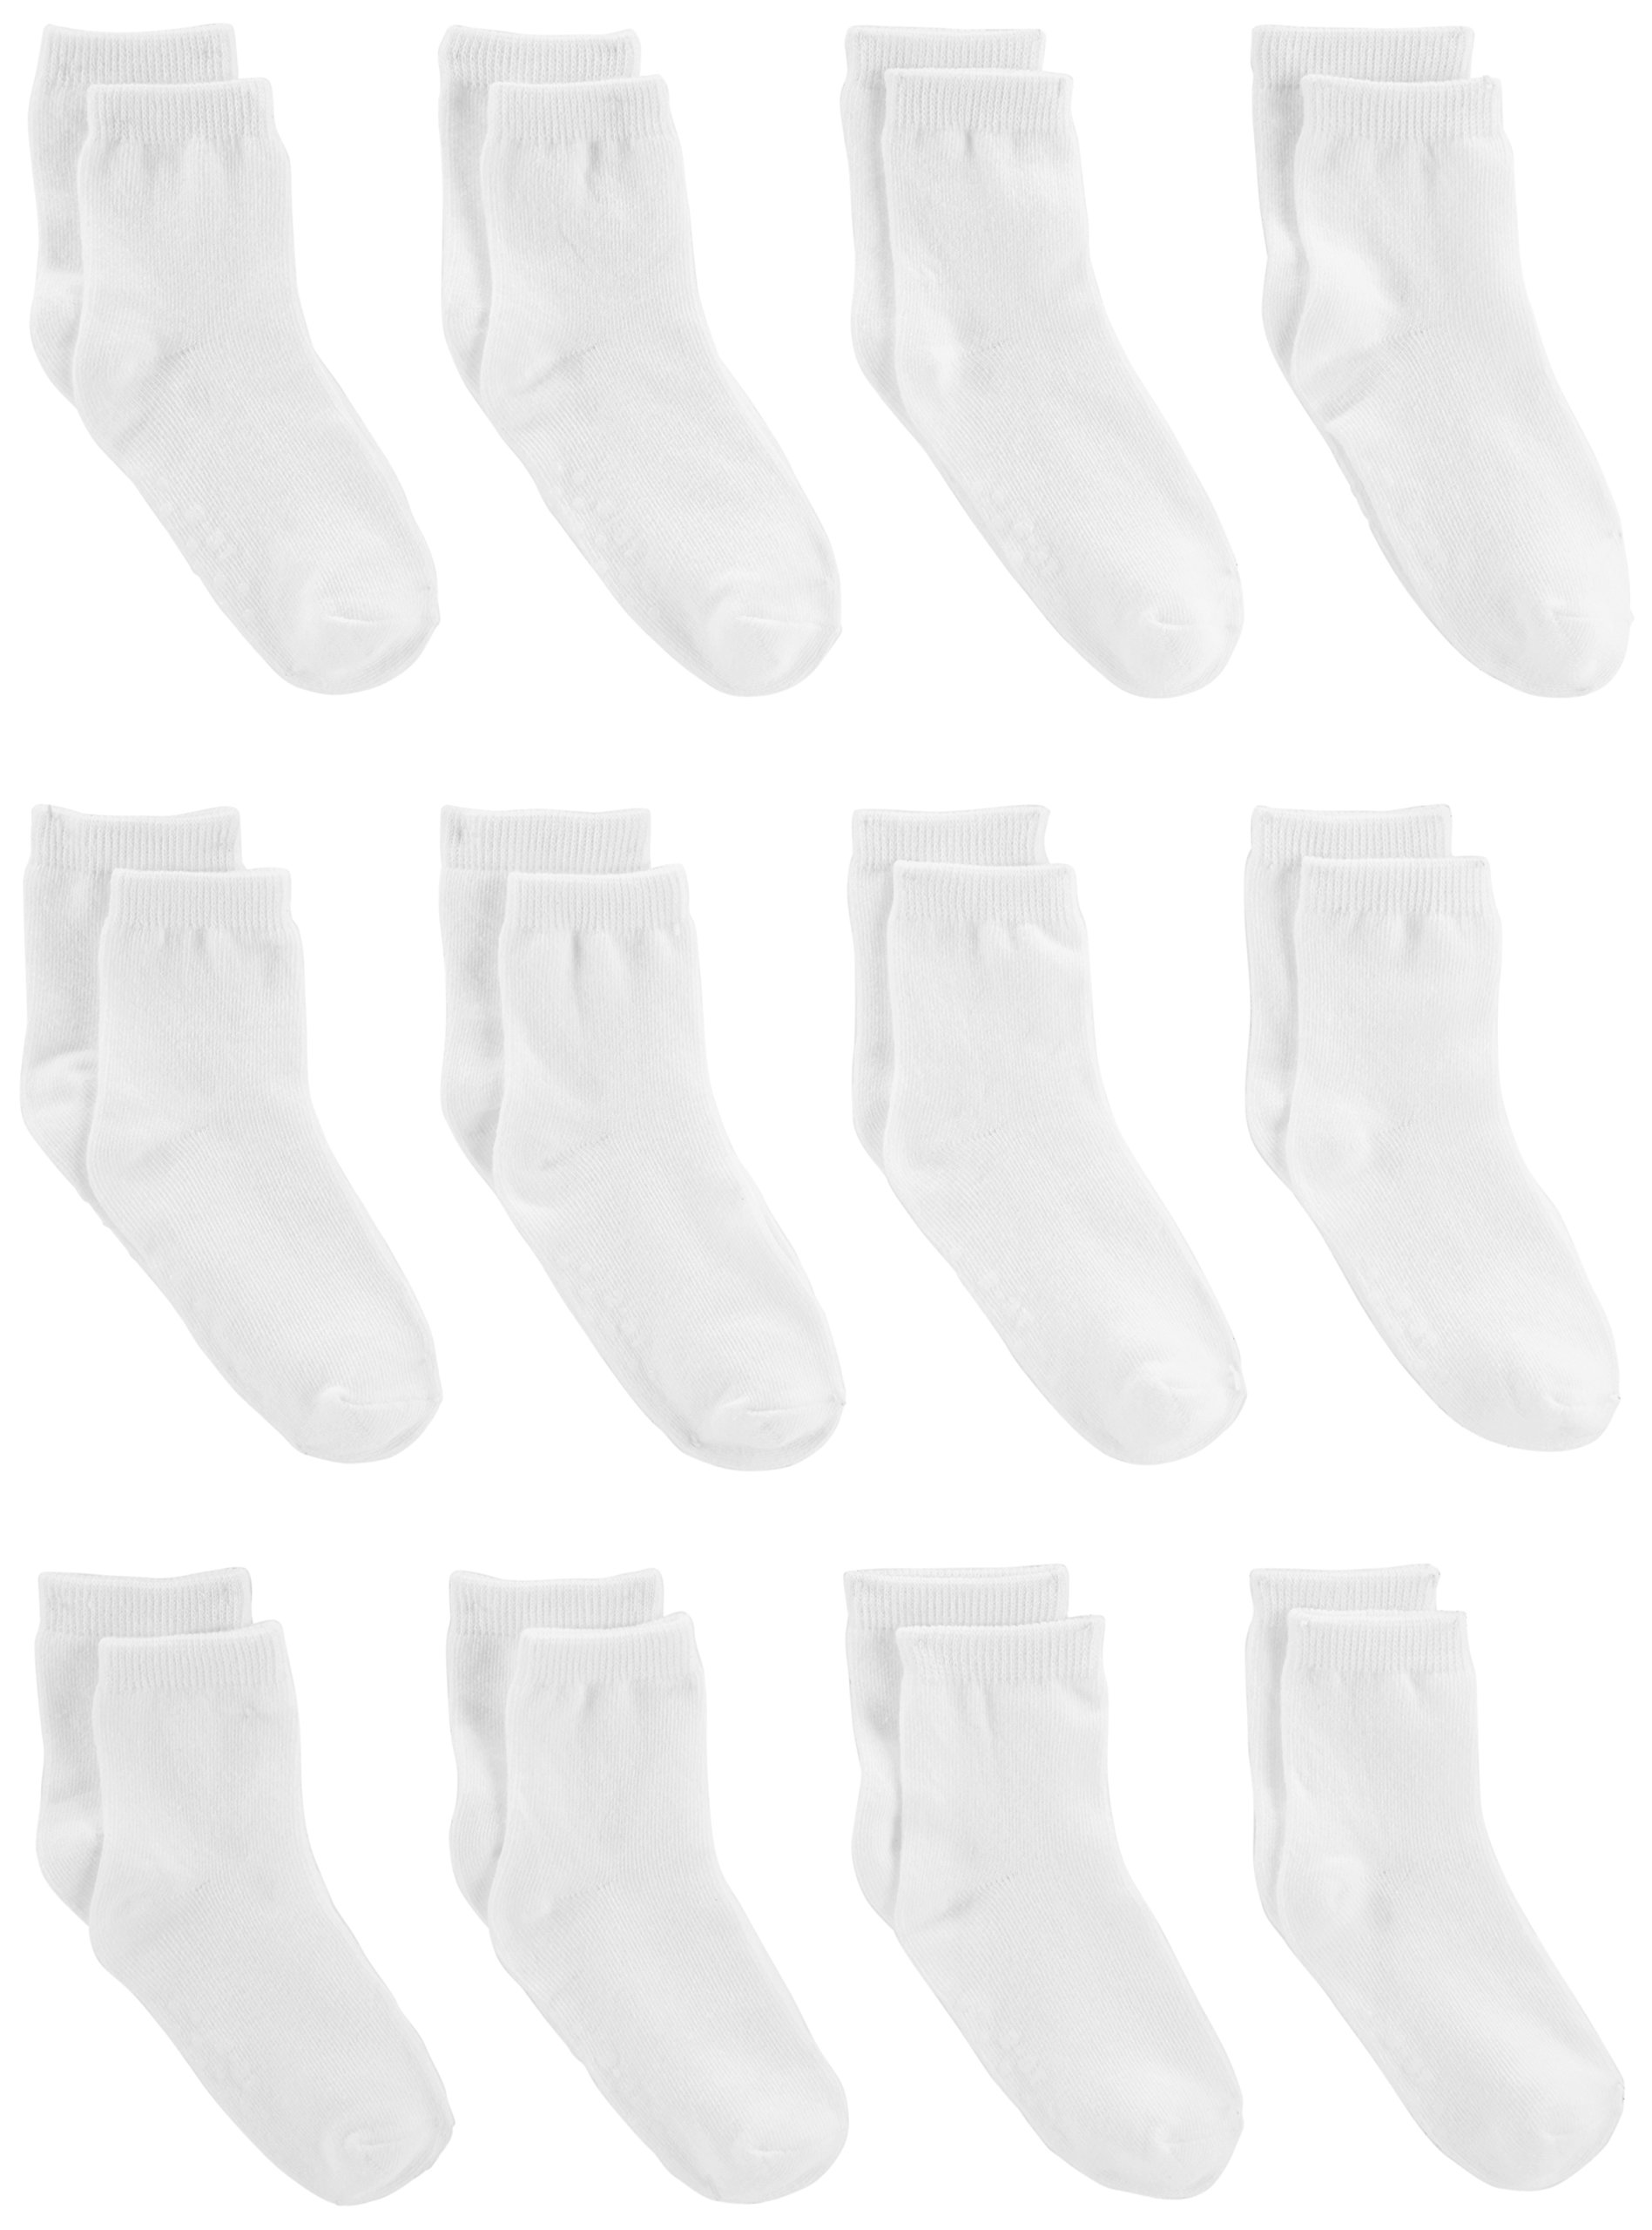 Simple Joys by Carter's Unisex Toddlers and Babies' Crew Socks, Pack of 12